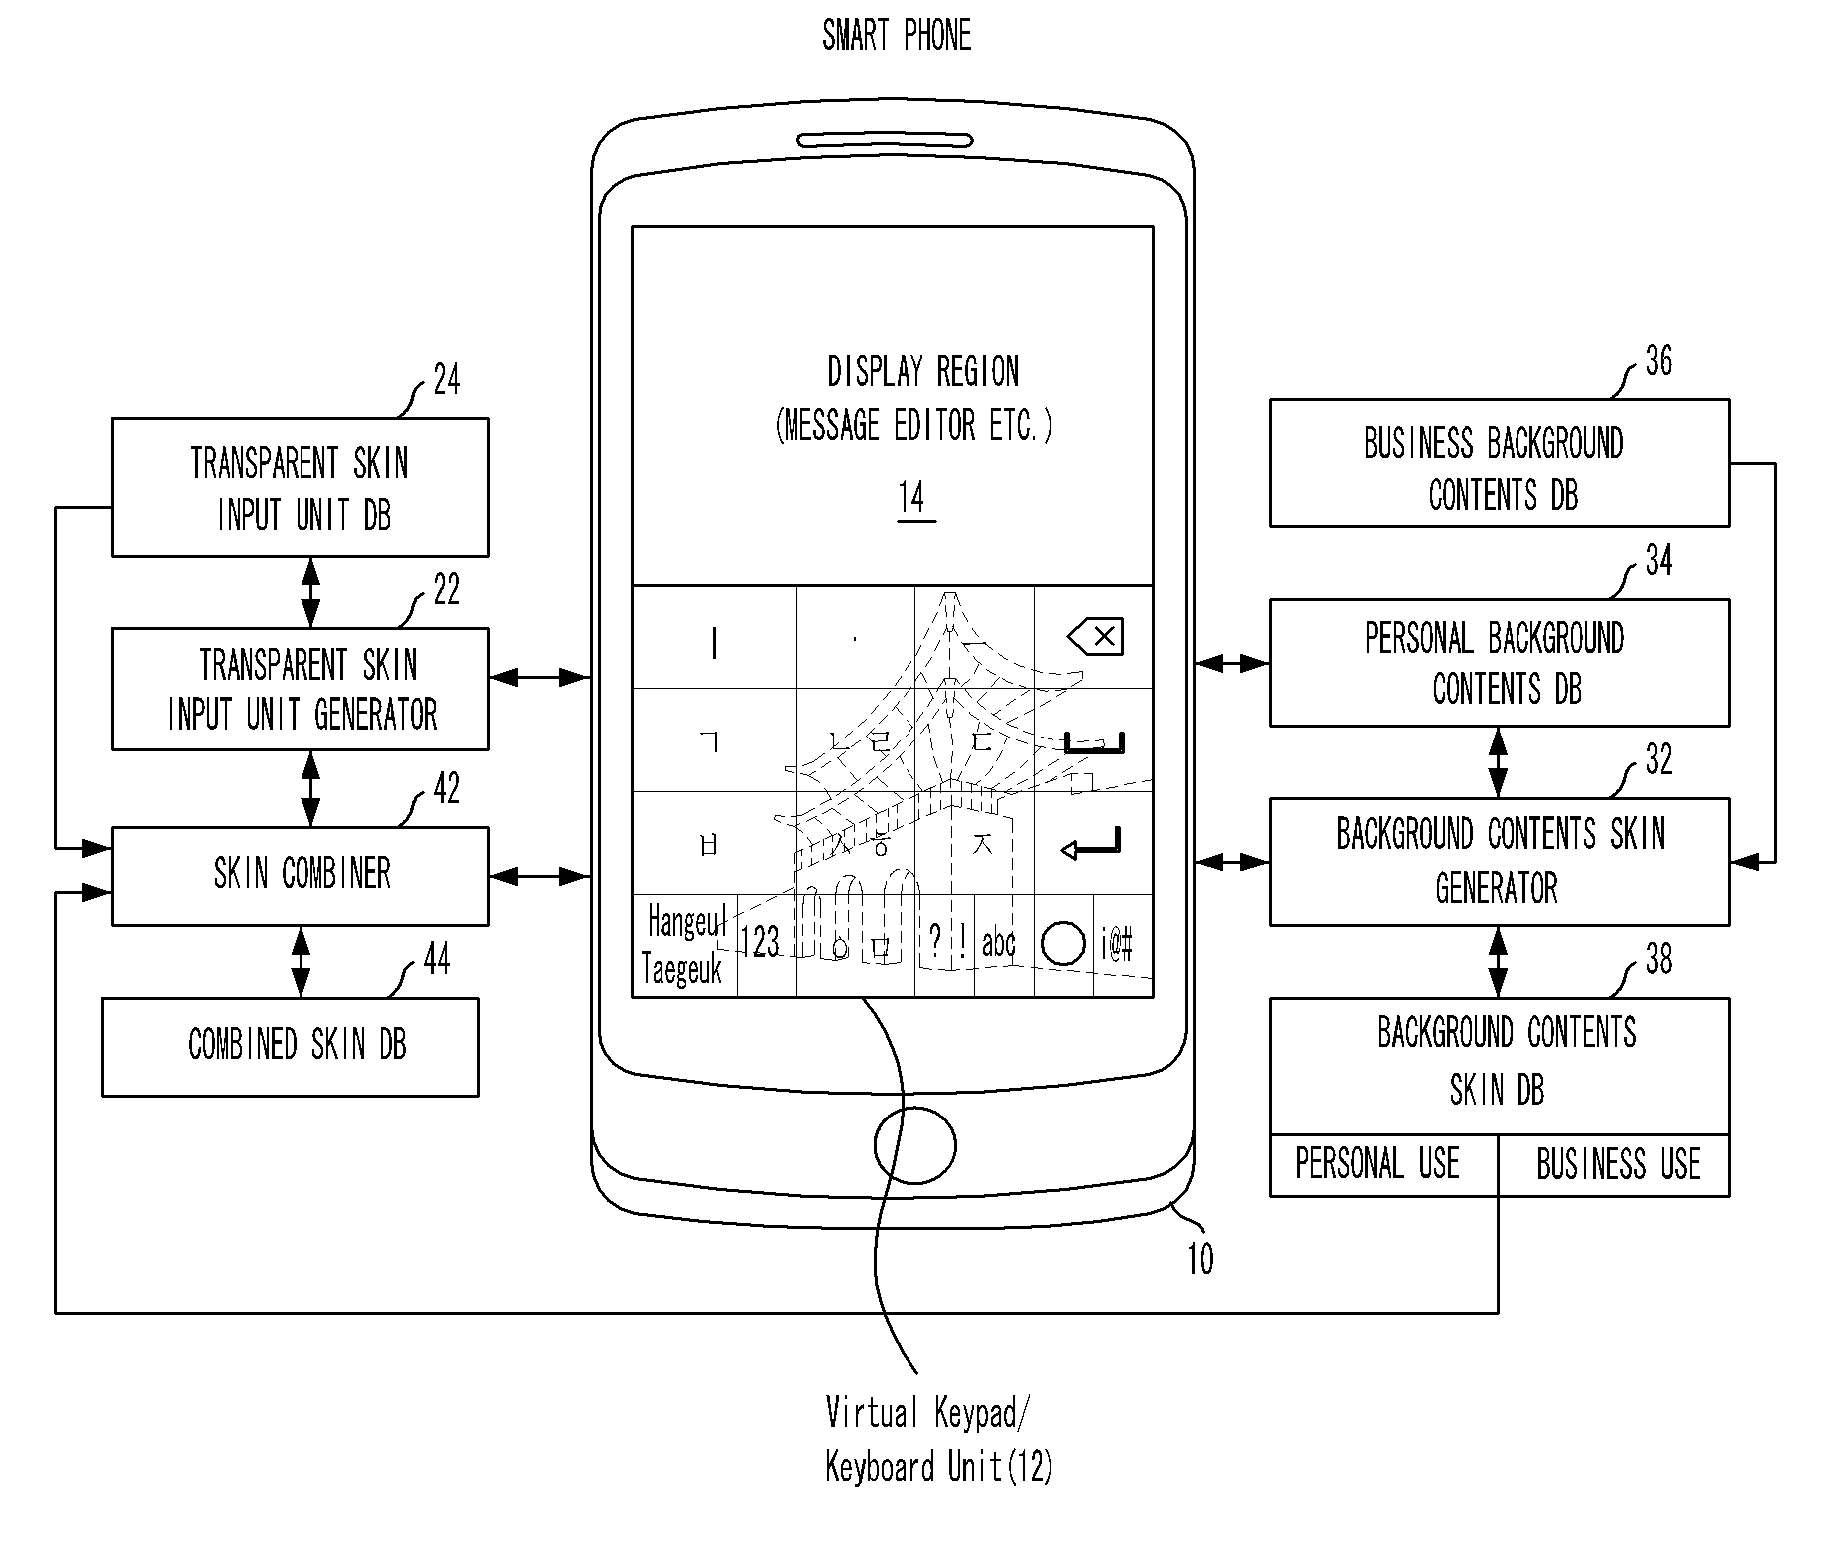 Method and system for providing background contents of virtual key input device